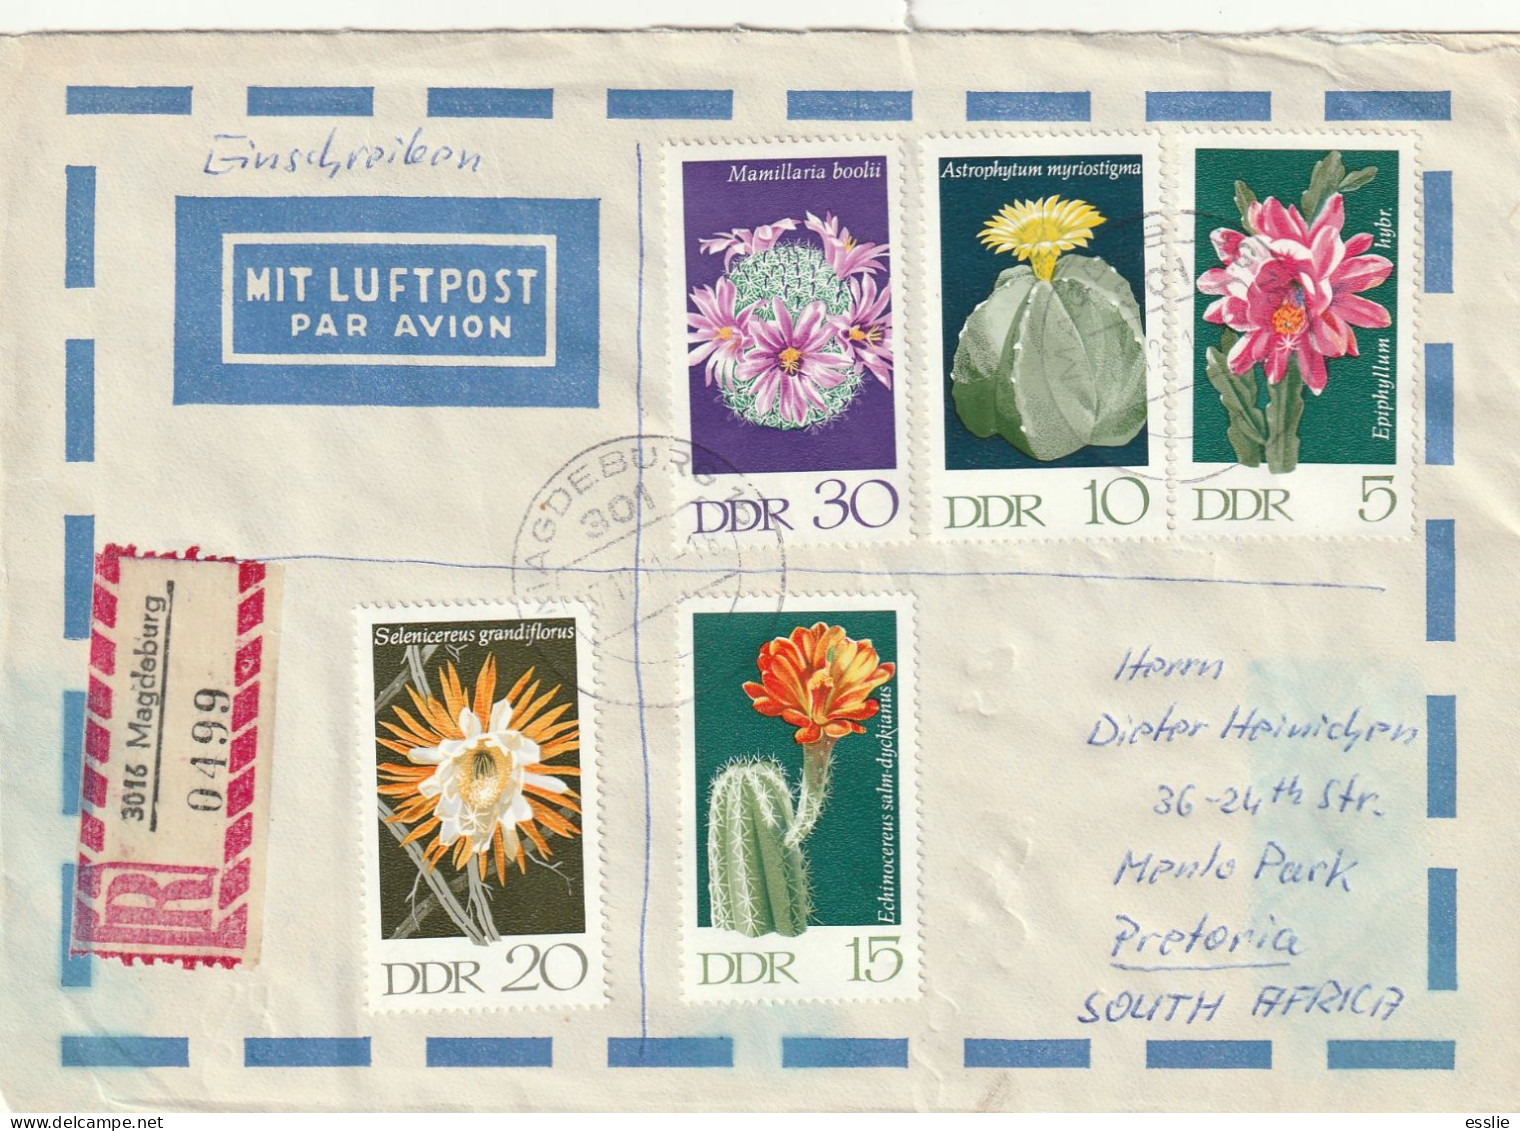 Germany DDR Cover Einschreiben Registered - 1970 - Flowering Cactus Plants Flowers Flora Fairy Tale Little Brother - Lettres & Documents